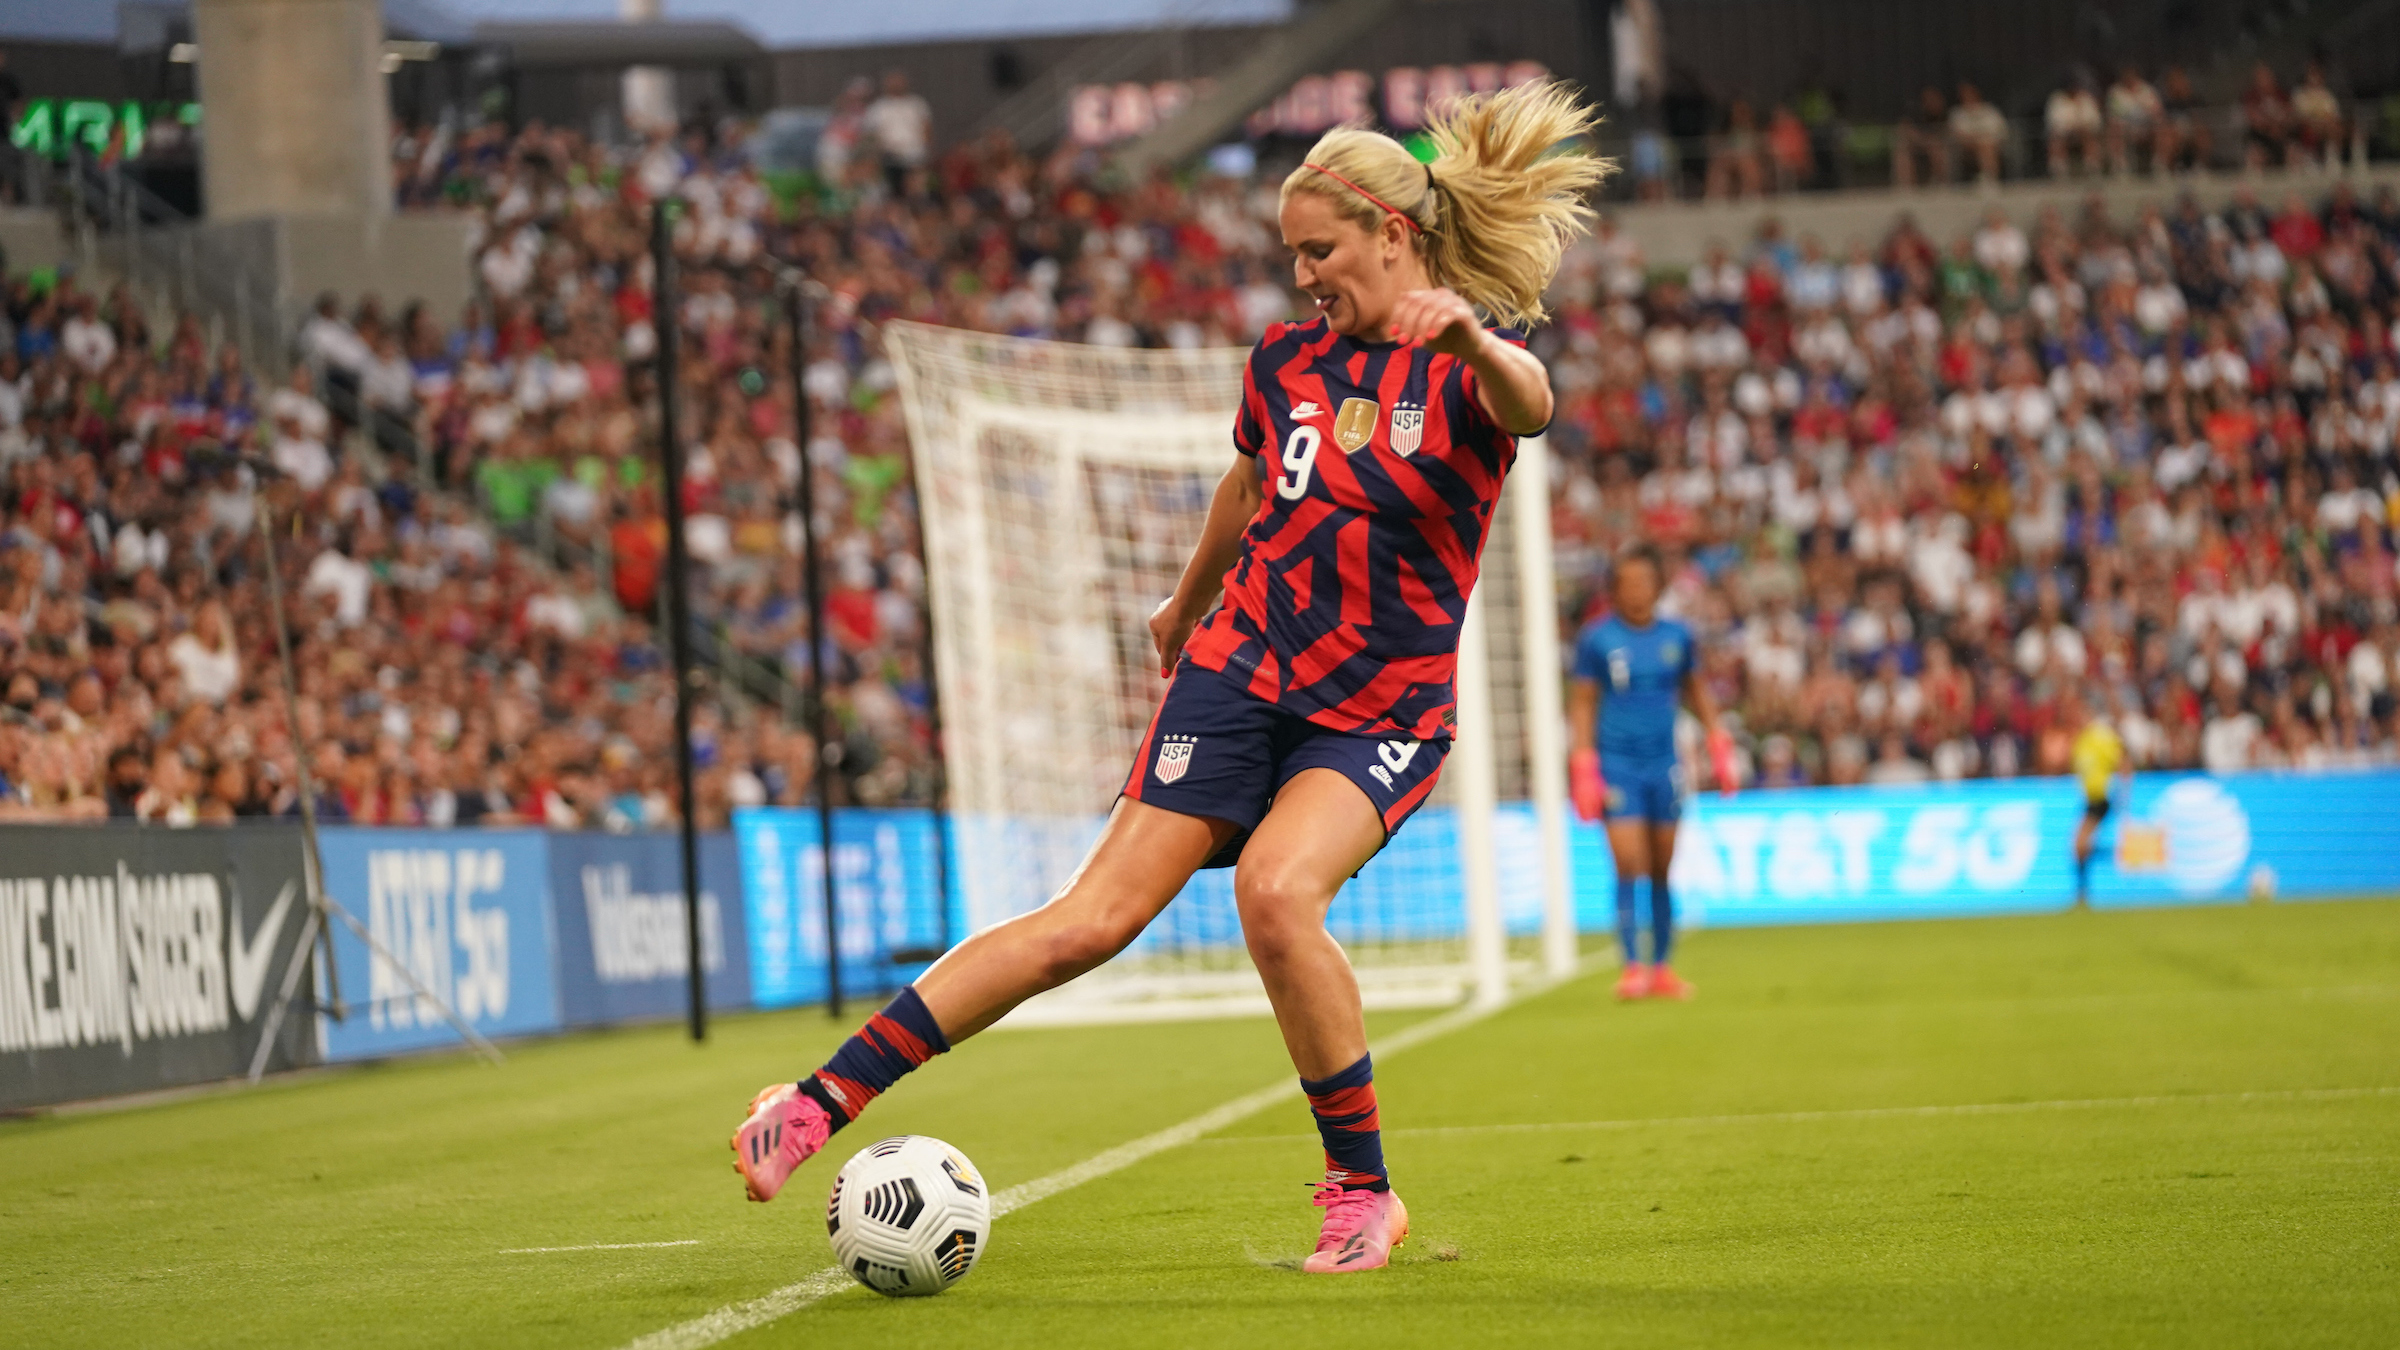 USWNT set to kickoff 2023 schedule with first live game on HBO Max